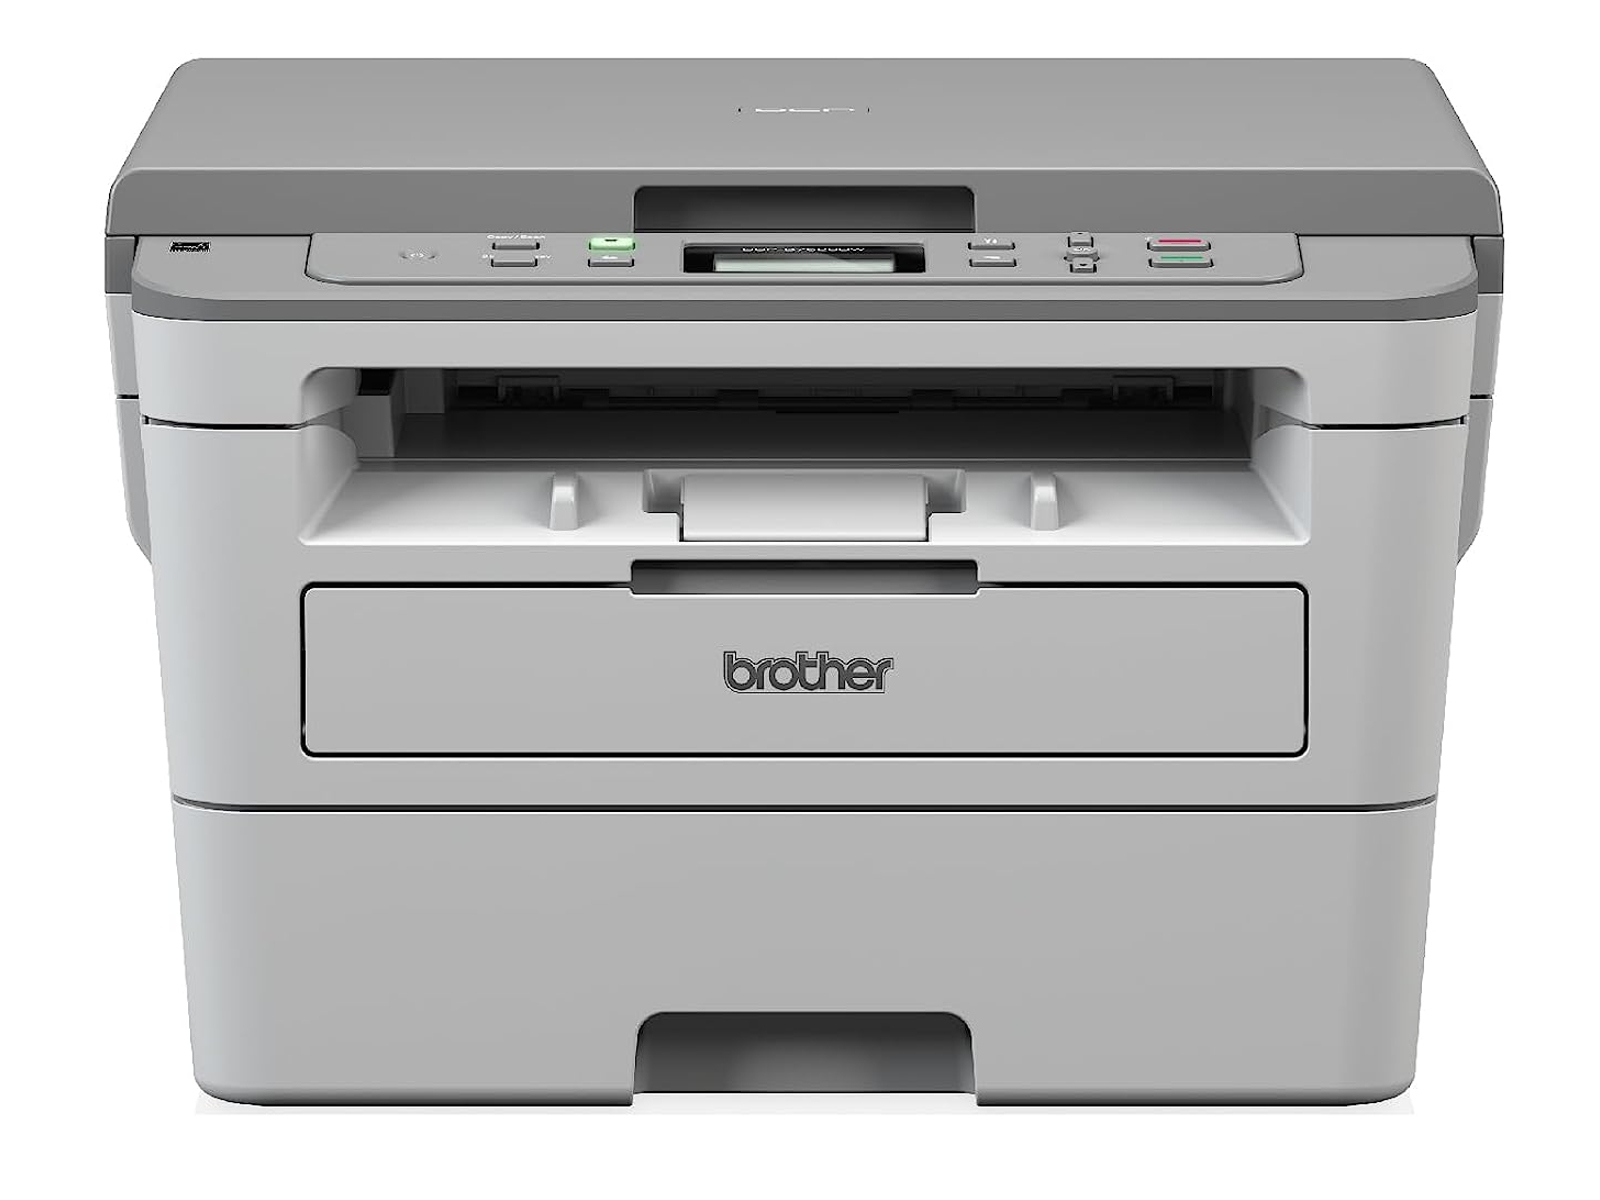 Brother DCP-B7500D Automatic Duplex Laser Printer